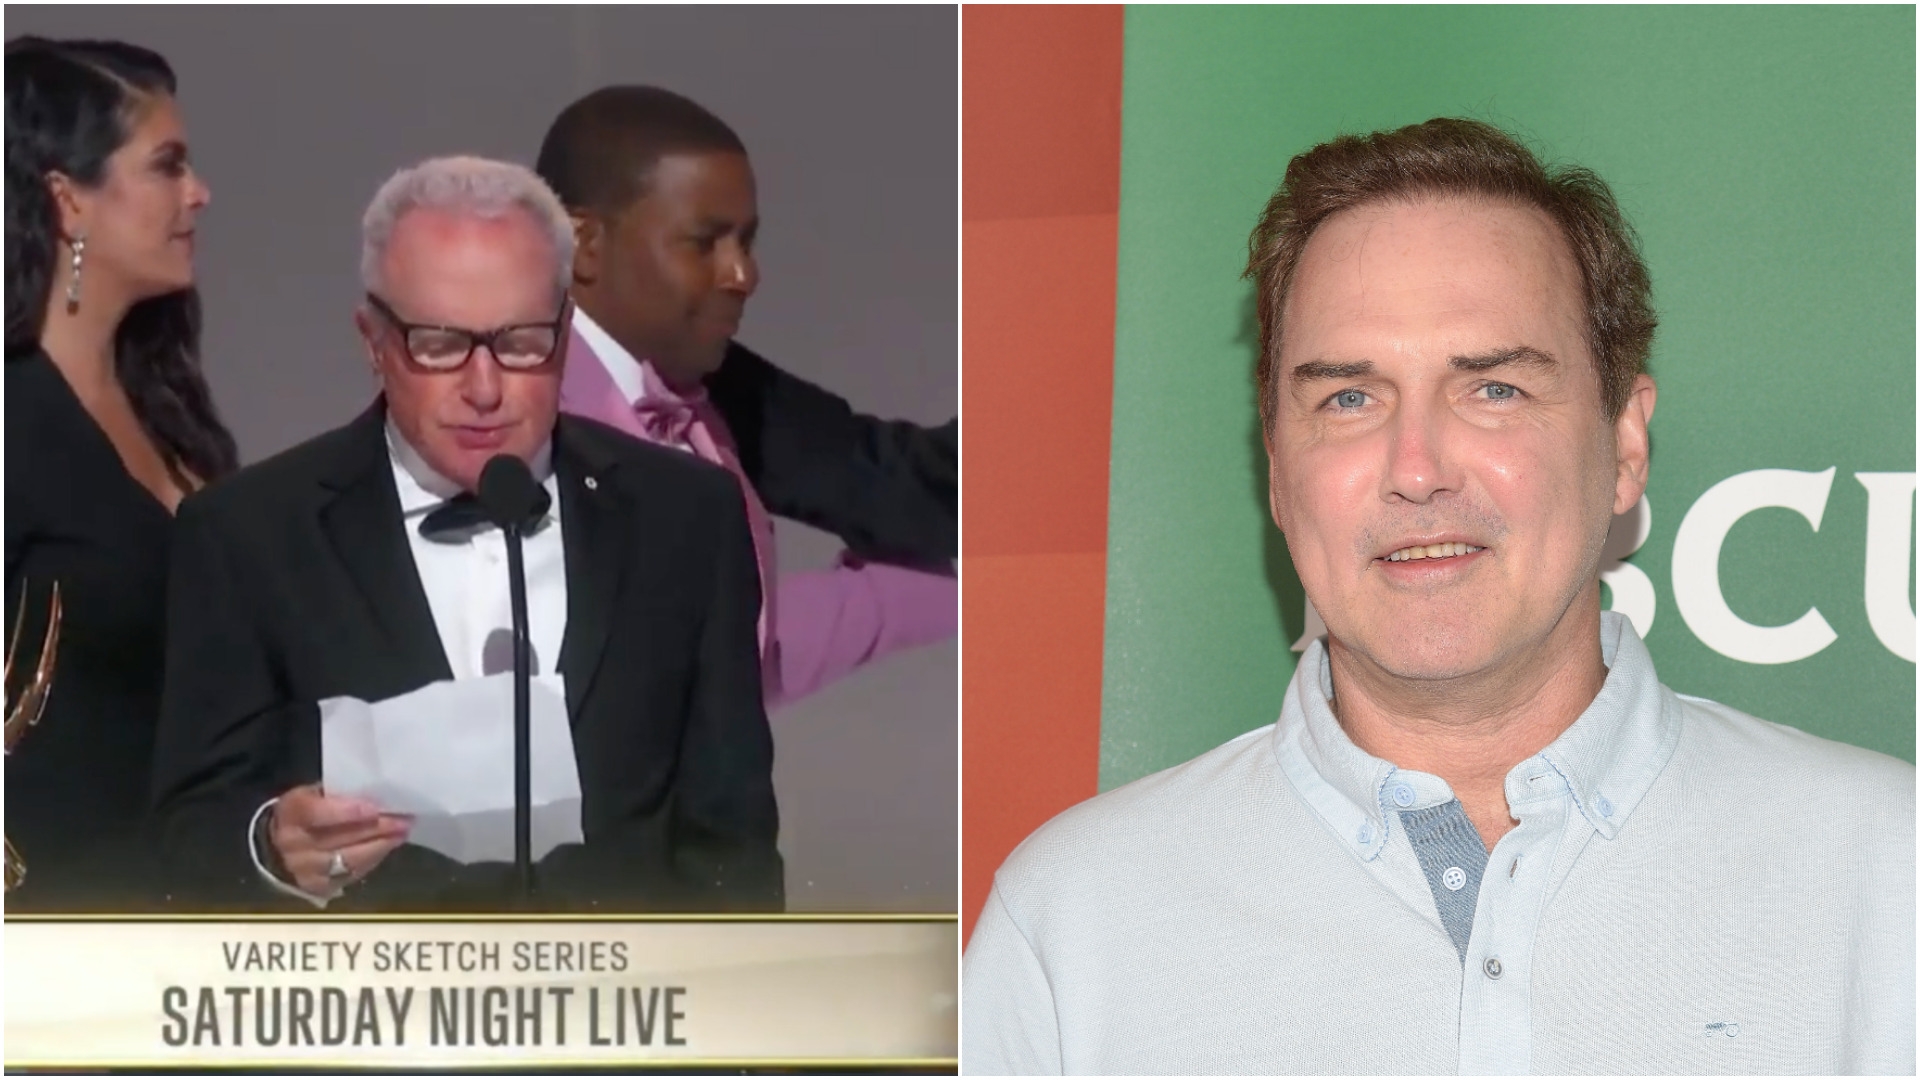 Lorne Michaels pays tribute to Norm Macdonald in Emmys acceptance speech